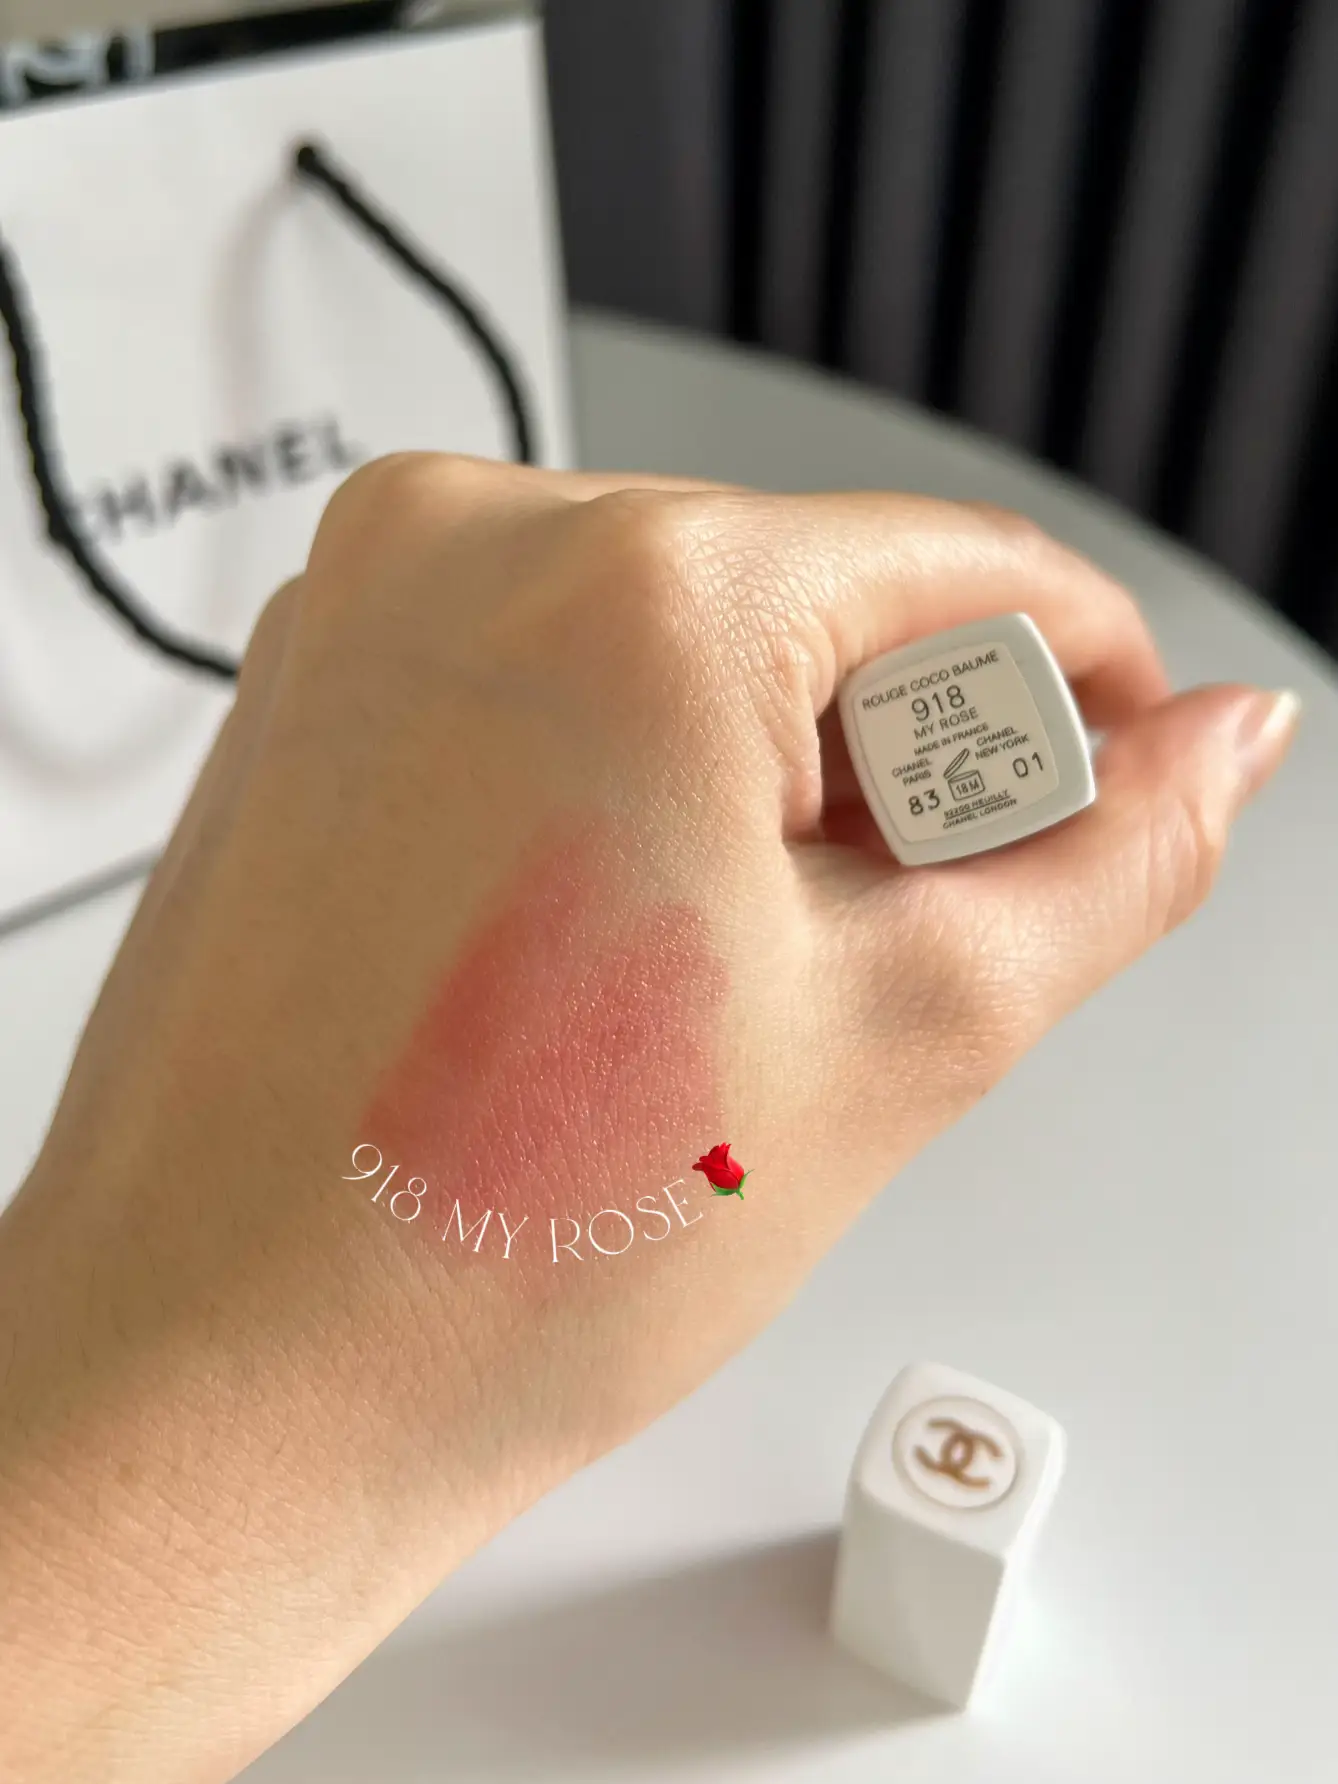 CHANEL LIP MEALO SIGN MLBB COLORS TAKE AND YOU RATE YOU SUPER HEART🌹✨💘, Gallery posted by Memew's Land🌷